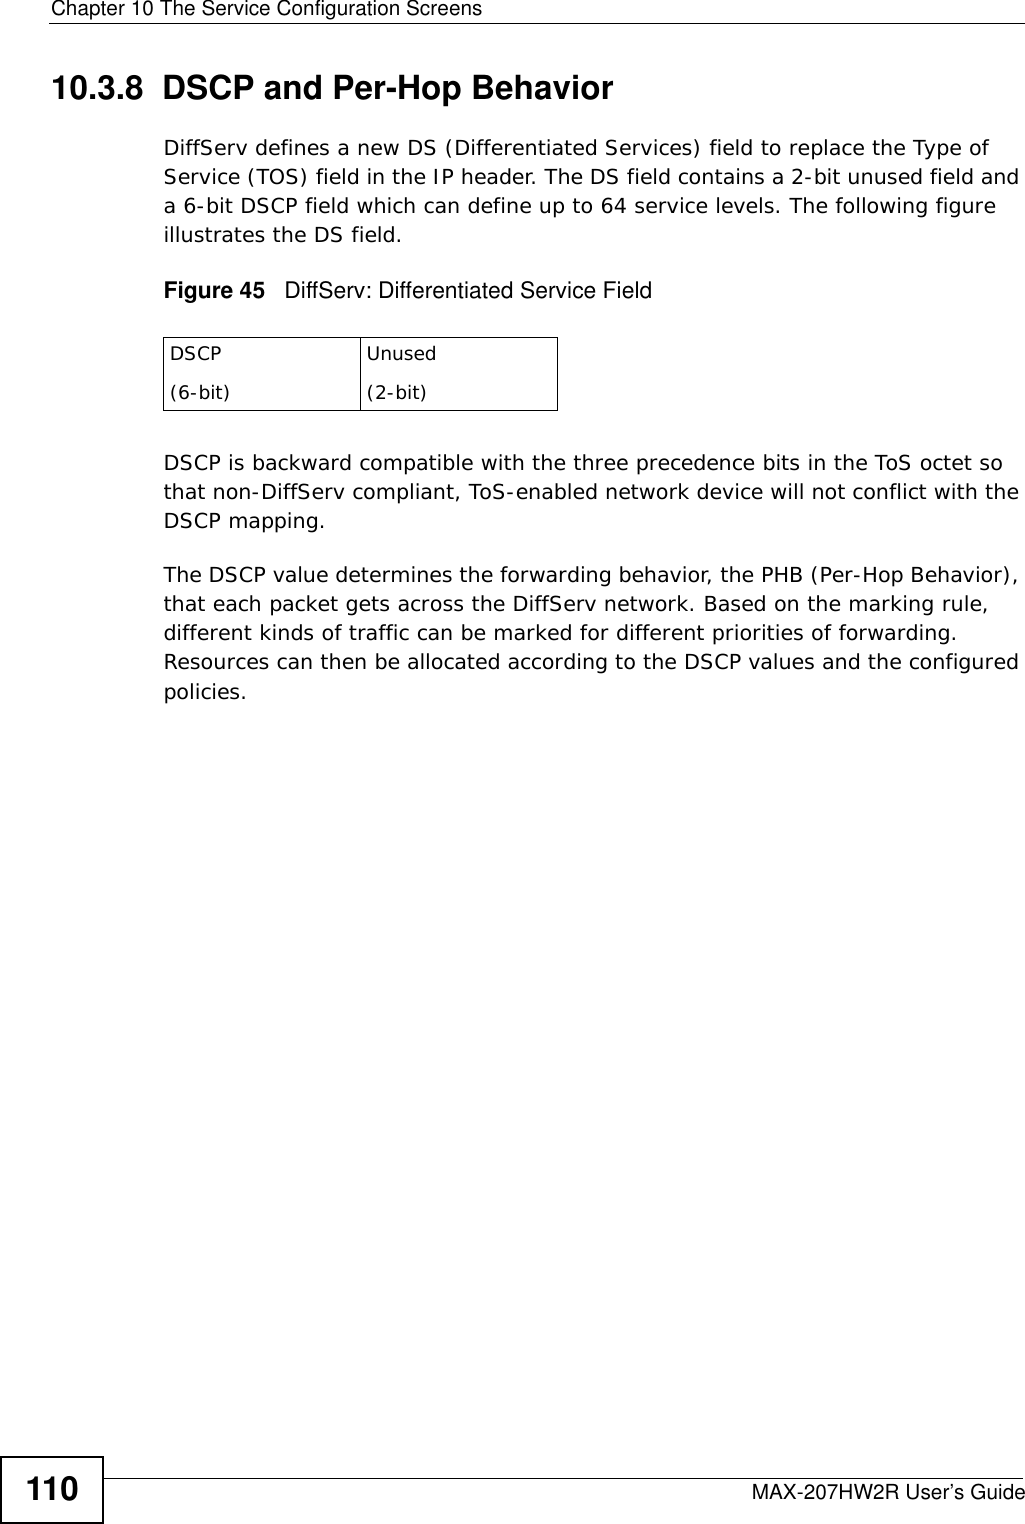 Chapter 10 The Service Configuration ScreensMAX-207HW2R User’s Guide11010.3.8  DSCP and Per-Hop Behavior DiffServ defines a new DS (Differentiated Services) field to replace the Type of Service (TOS) field in the IP header. The DS field contains a 2-bit unused field and a 6-bit DSCP field which can define up to 64 service levels. The following figure illustrates the DS field. Figure 45   DiffServ: Differentiated Service FieldDSCP is backward compatible with the three precedence bits in the ToS octet so that non-DiffServ compliant, ToS-enabled network device will not conflict with the DSCP mapping. The DSCP value determines the forwarding behavior, the PHB (Per-Hop Behavior), that each packet gets across the DiffServ network. Based on the marking rule, different kinds of traffic can be marked for different priorities of forwarding. Resources can then be allocated according to the DSCP values and the configured policies.DSCP(6-bit)Unused(2-bit)